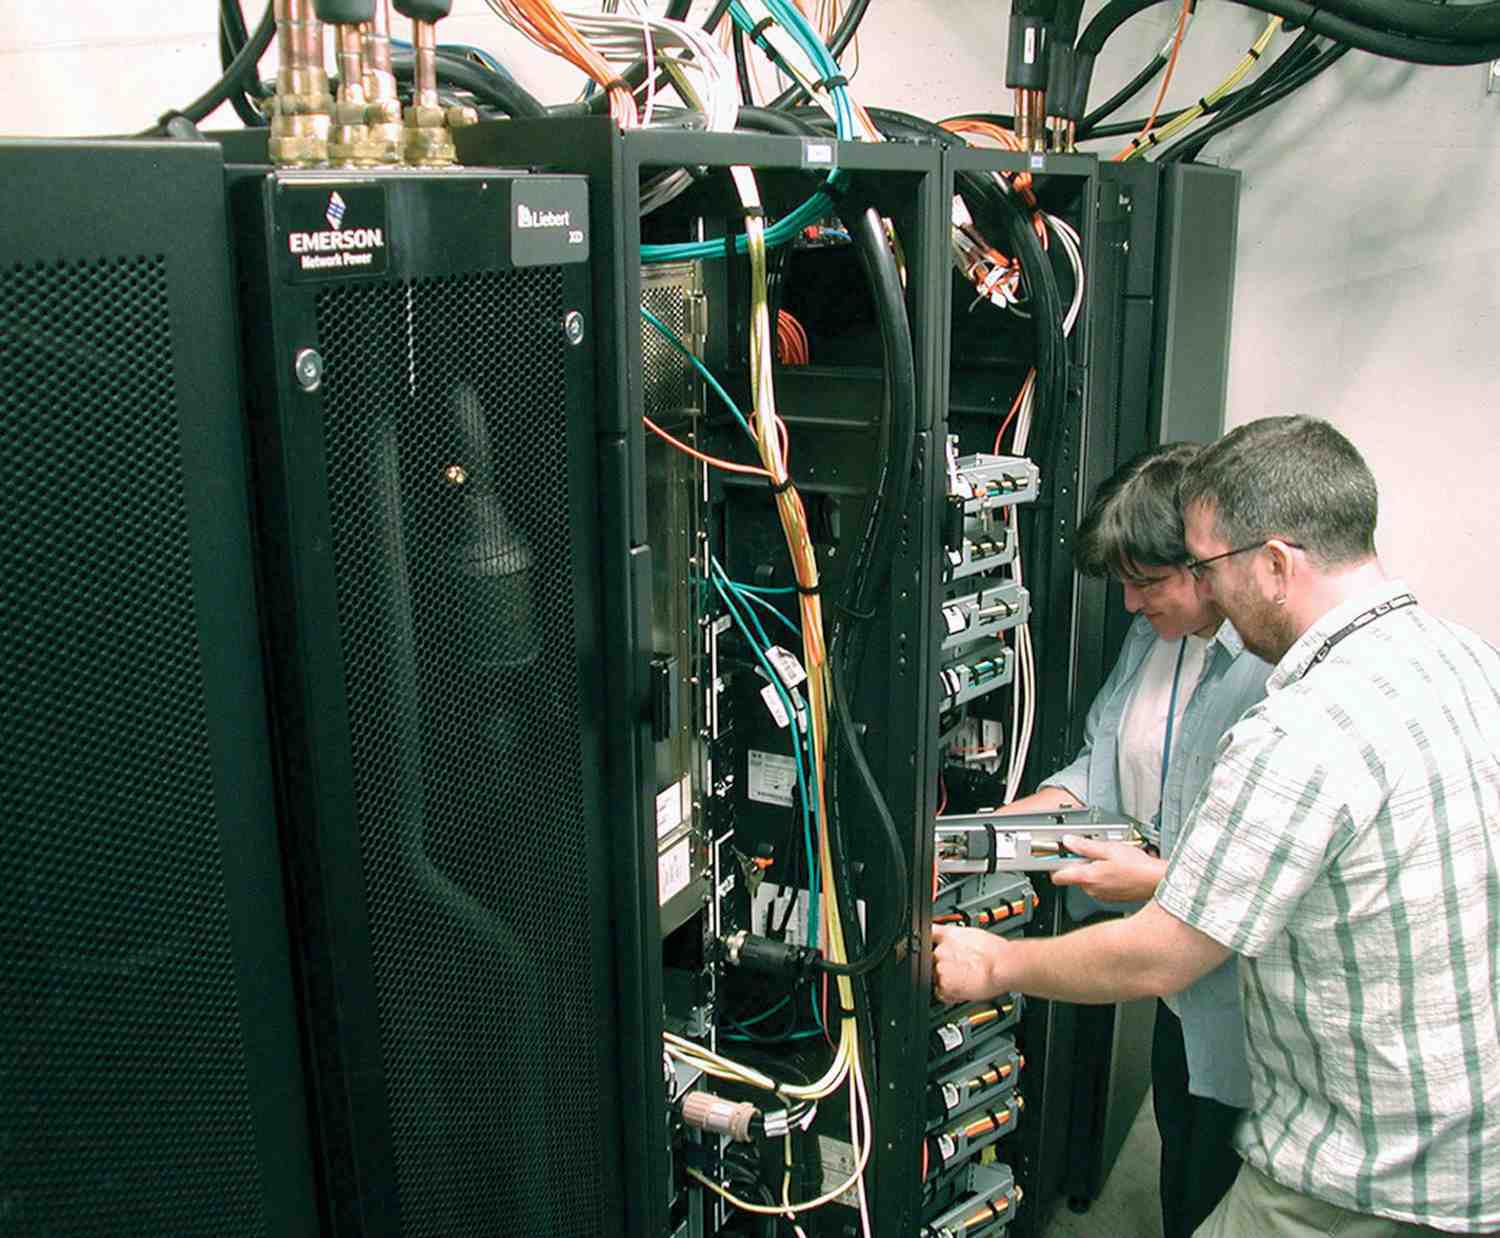 Lead system administrator Denise Deatrich and network administrator Cris Payne examine the dCache servers.